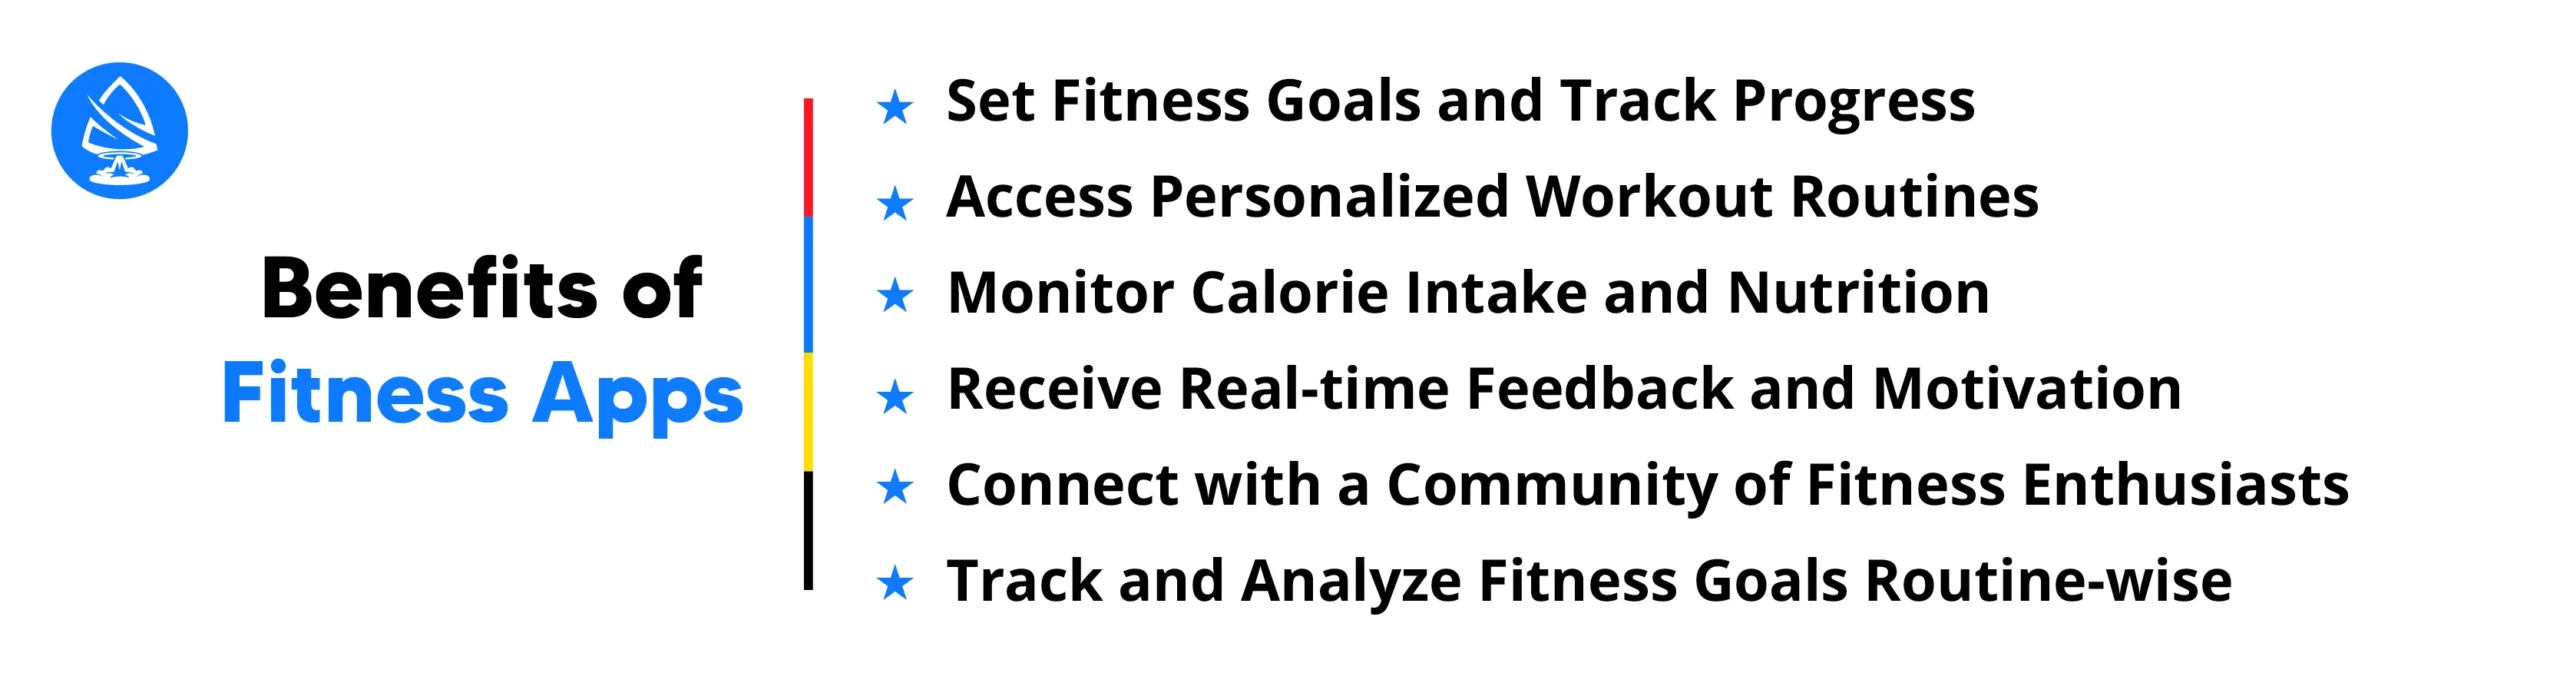 Benefits of Fitness Apps